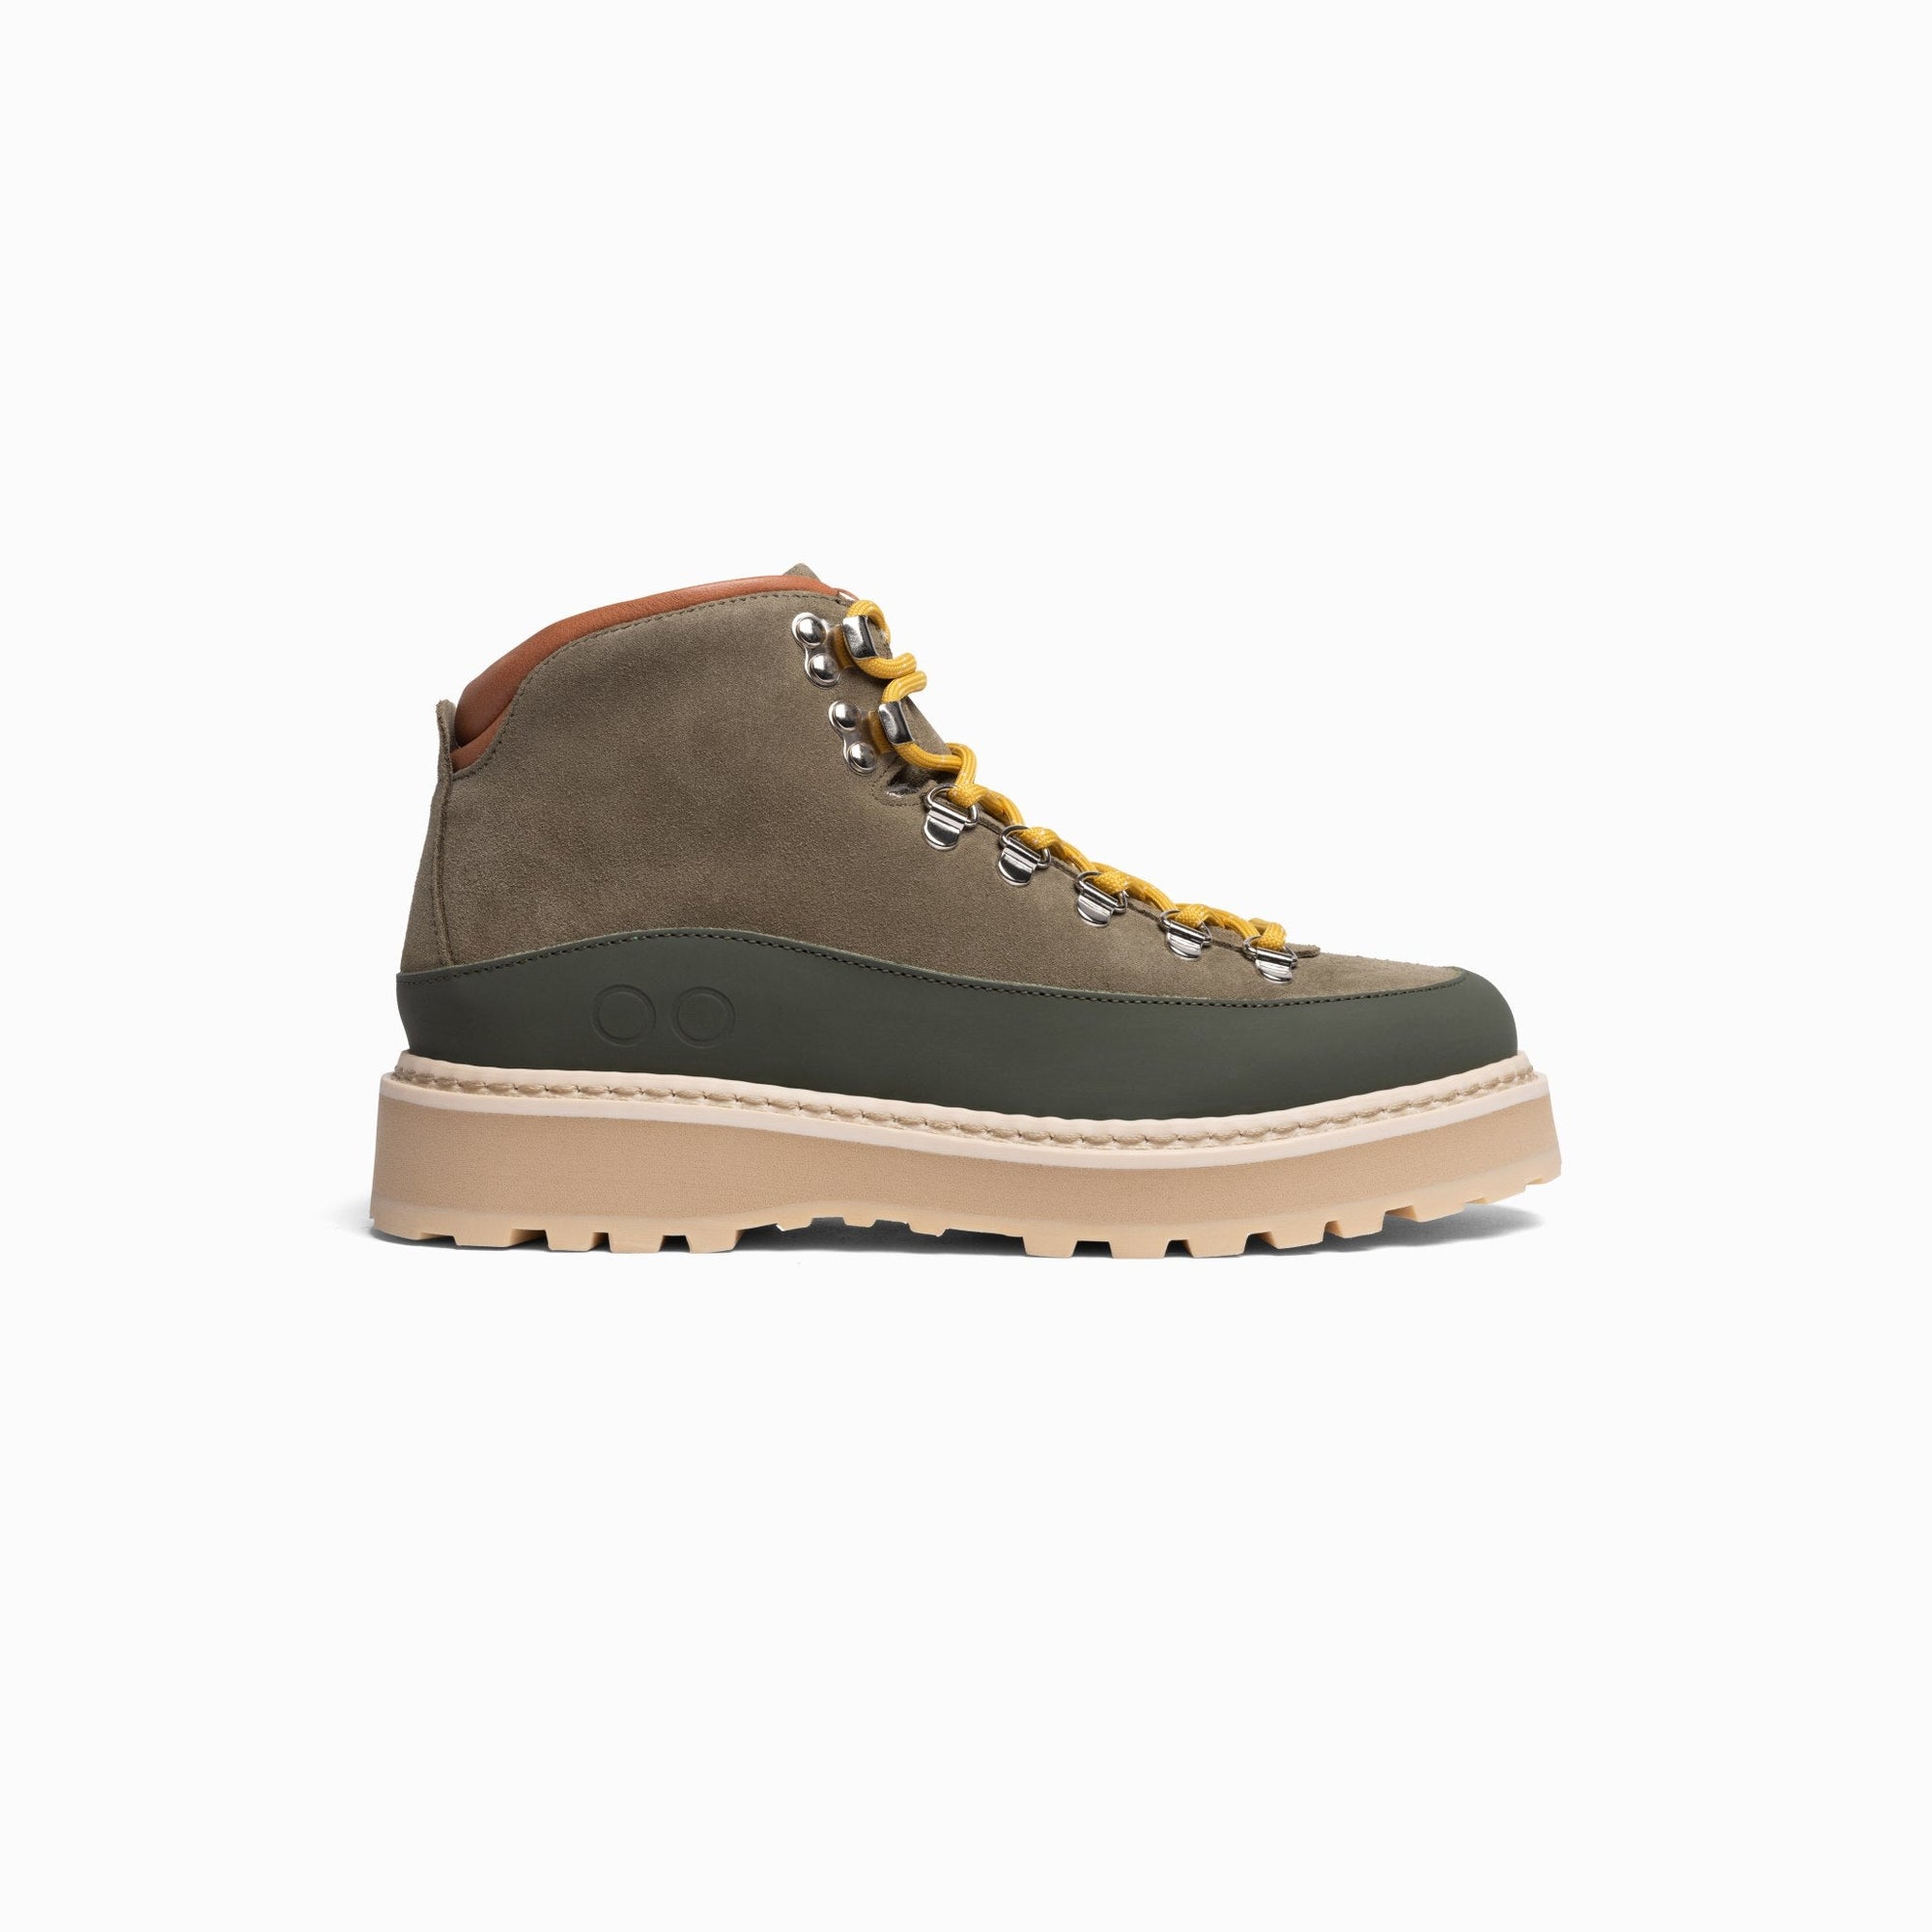 HIKING CORE CAP GRAINED COW LEATHER SHEARLING LINED M - MILITARY